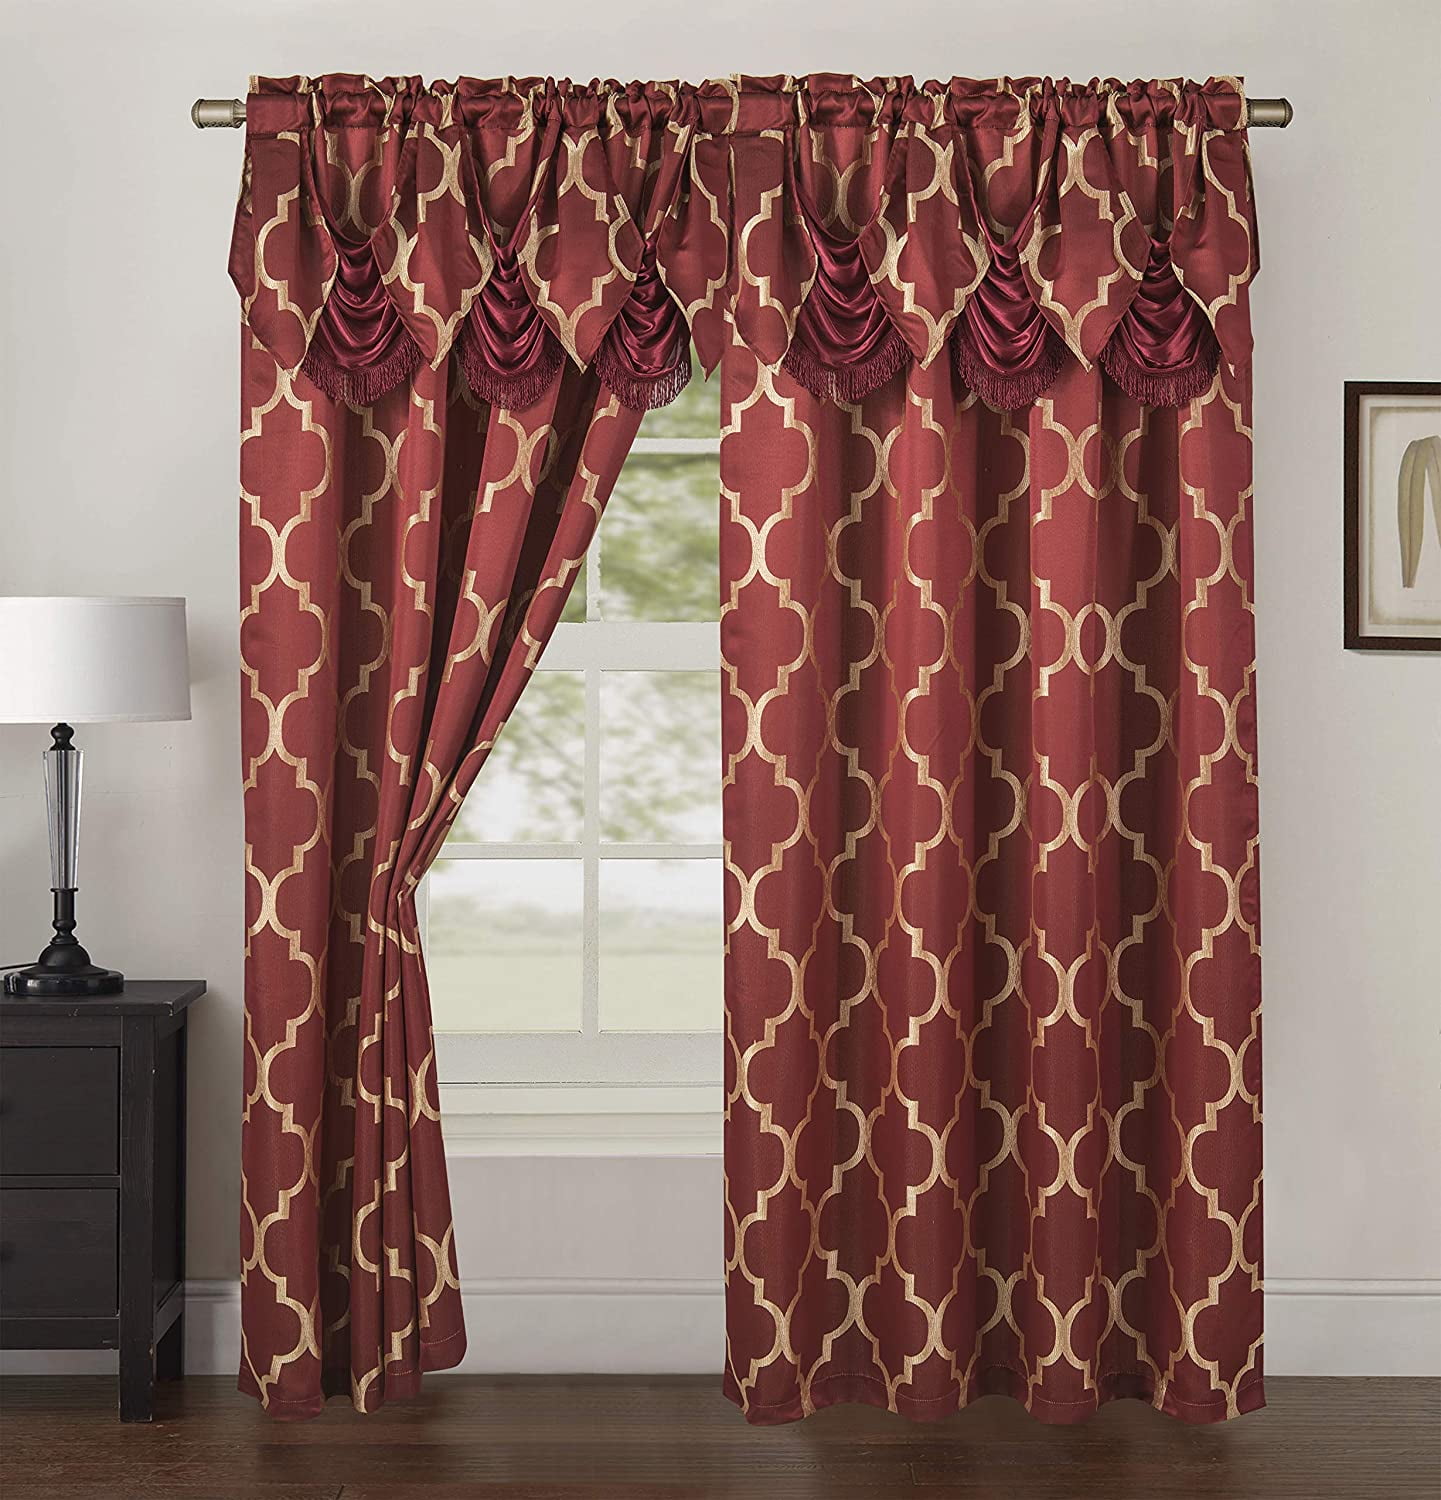 Luxury Jacquard Curtain Panel Set with Attached Valance 2pcs Set.54x 84 inch 